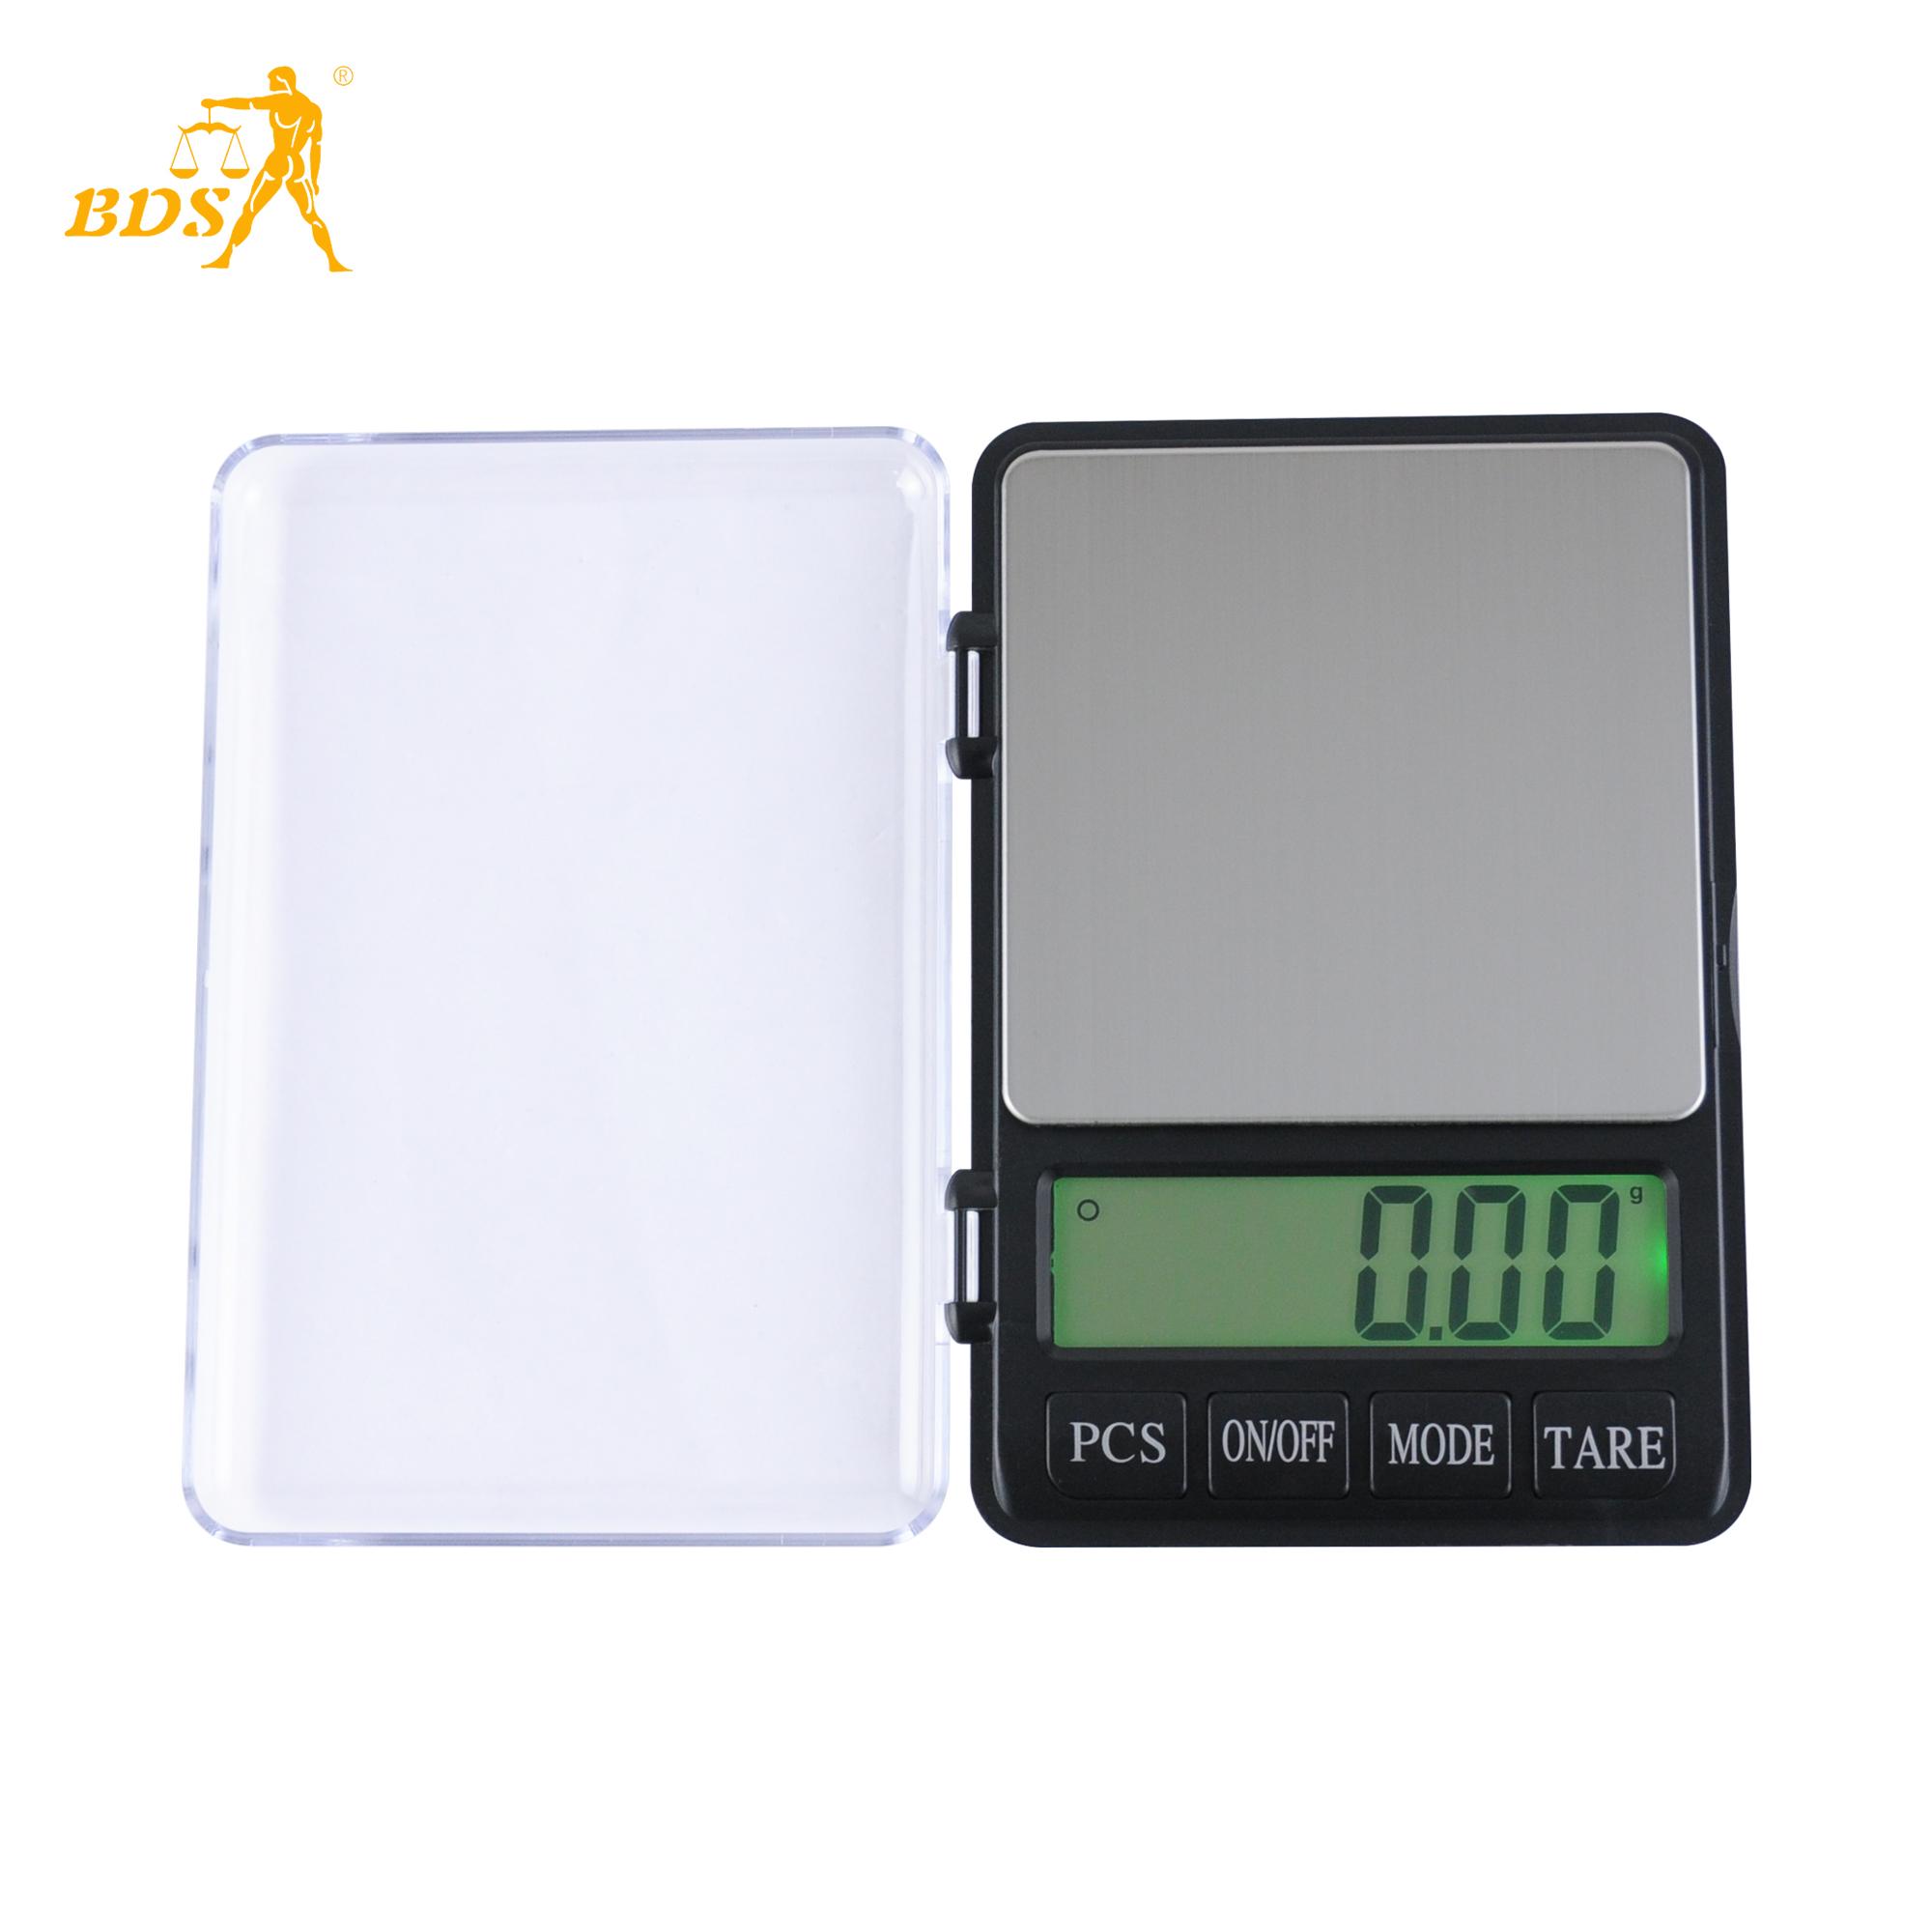 BDS1108 jewelry pocket scale plam scale pocket scale portable scale